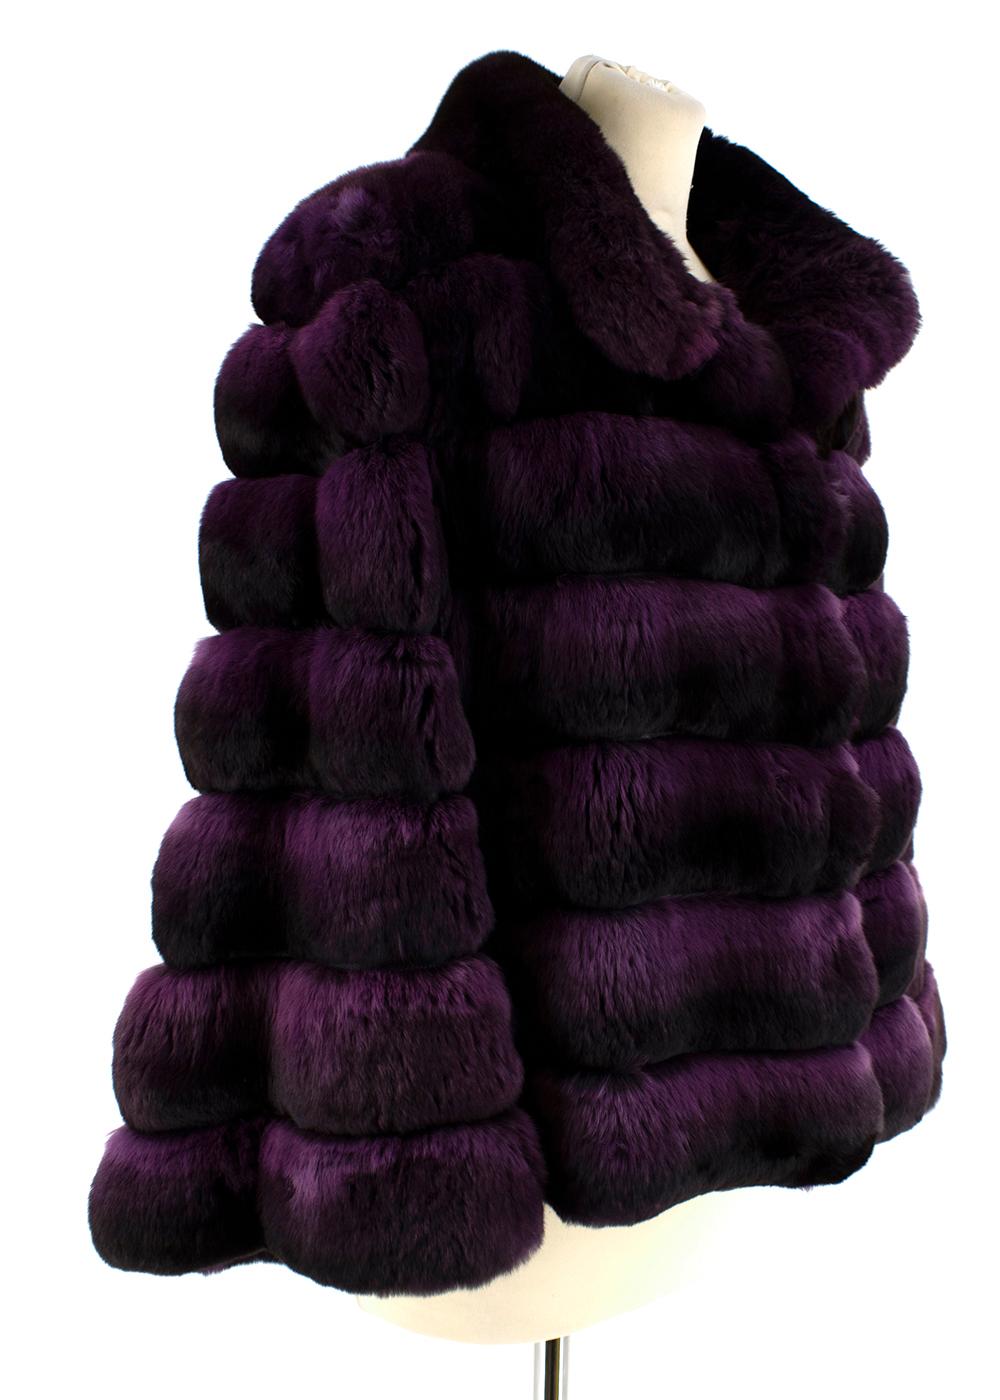 Carmen Marc Valvo Couture Purple Chinchilla Fur Jacket  

- Gradient 
- Small Collar 
- Billowing Sleeves 
- Fully Lined 
- Front Concealed Clasp Closures 

Materials:
- 100% Chinchilla Fur
 
Shoulders: 42cm
Sleeves: 56cm
Chest: 45cm
Waist: